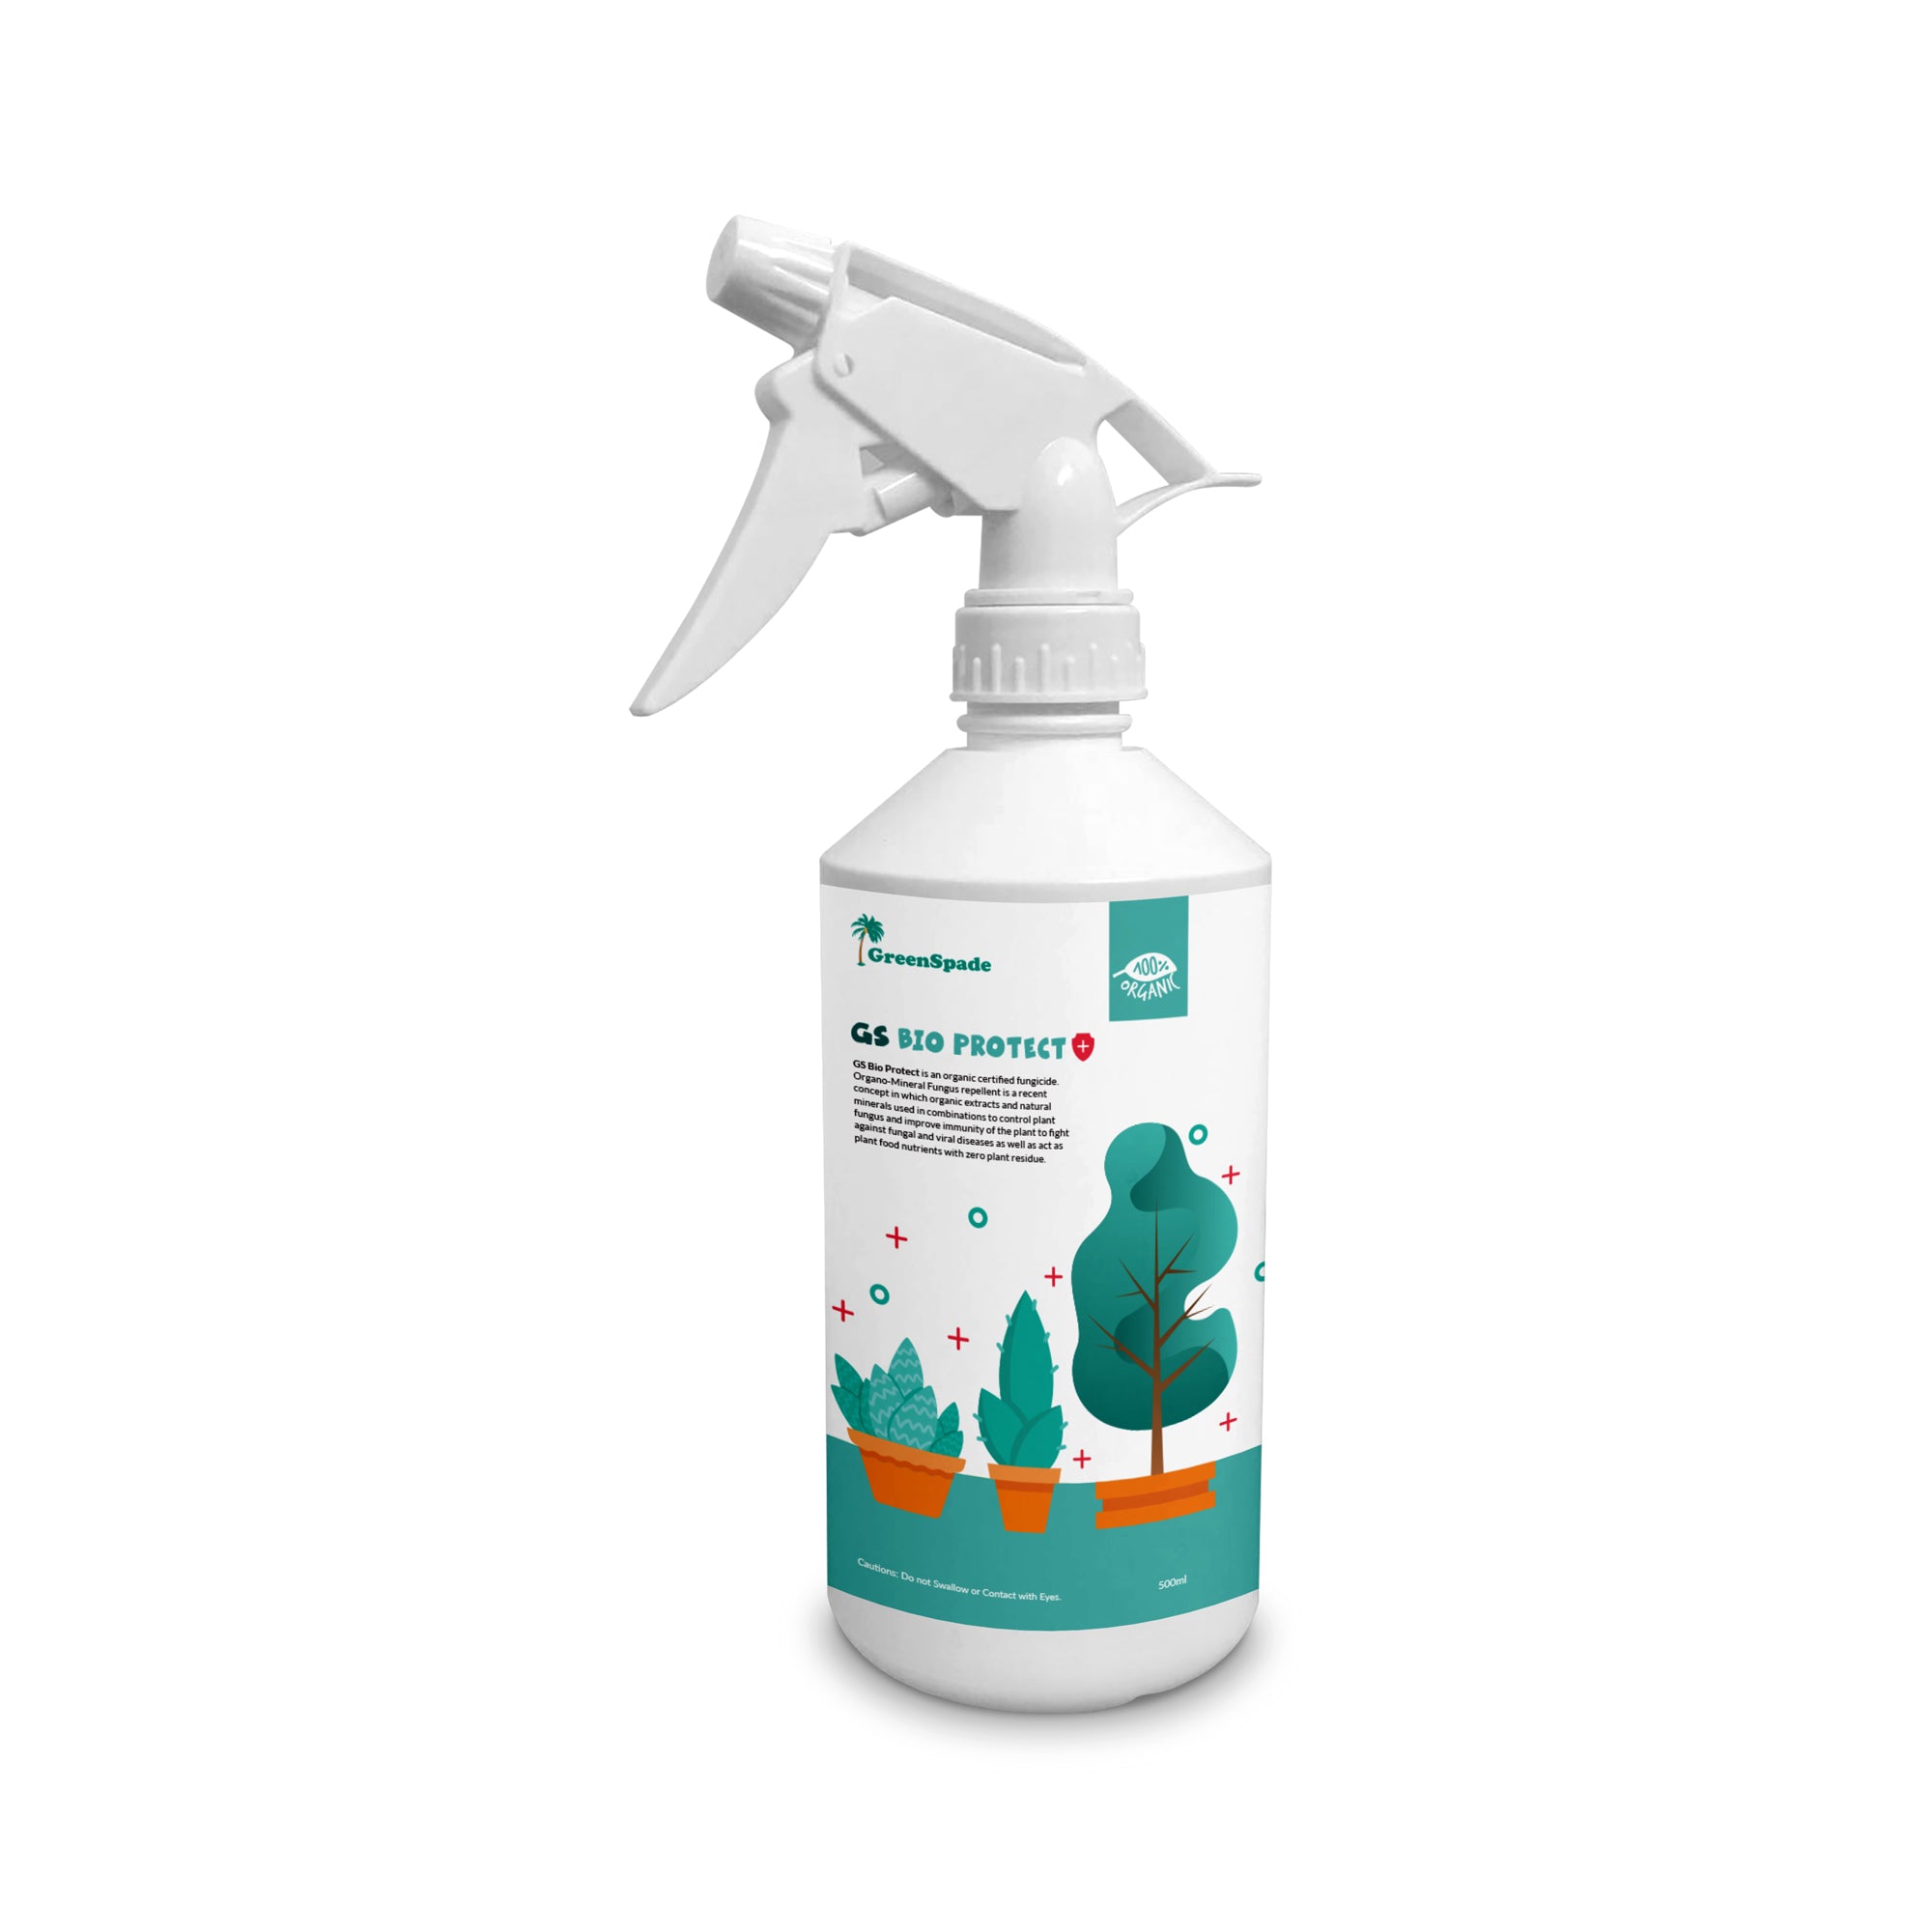 TGCSG Bio Protect (Fungicide) | Shop at The Green Collective